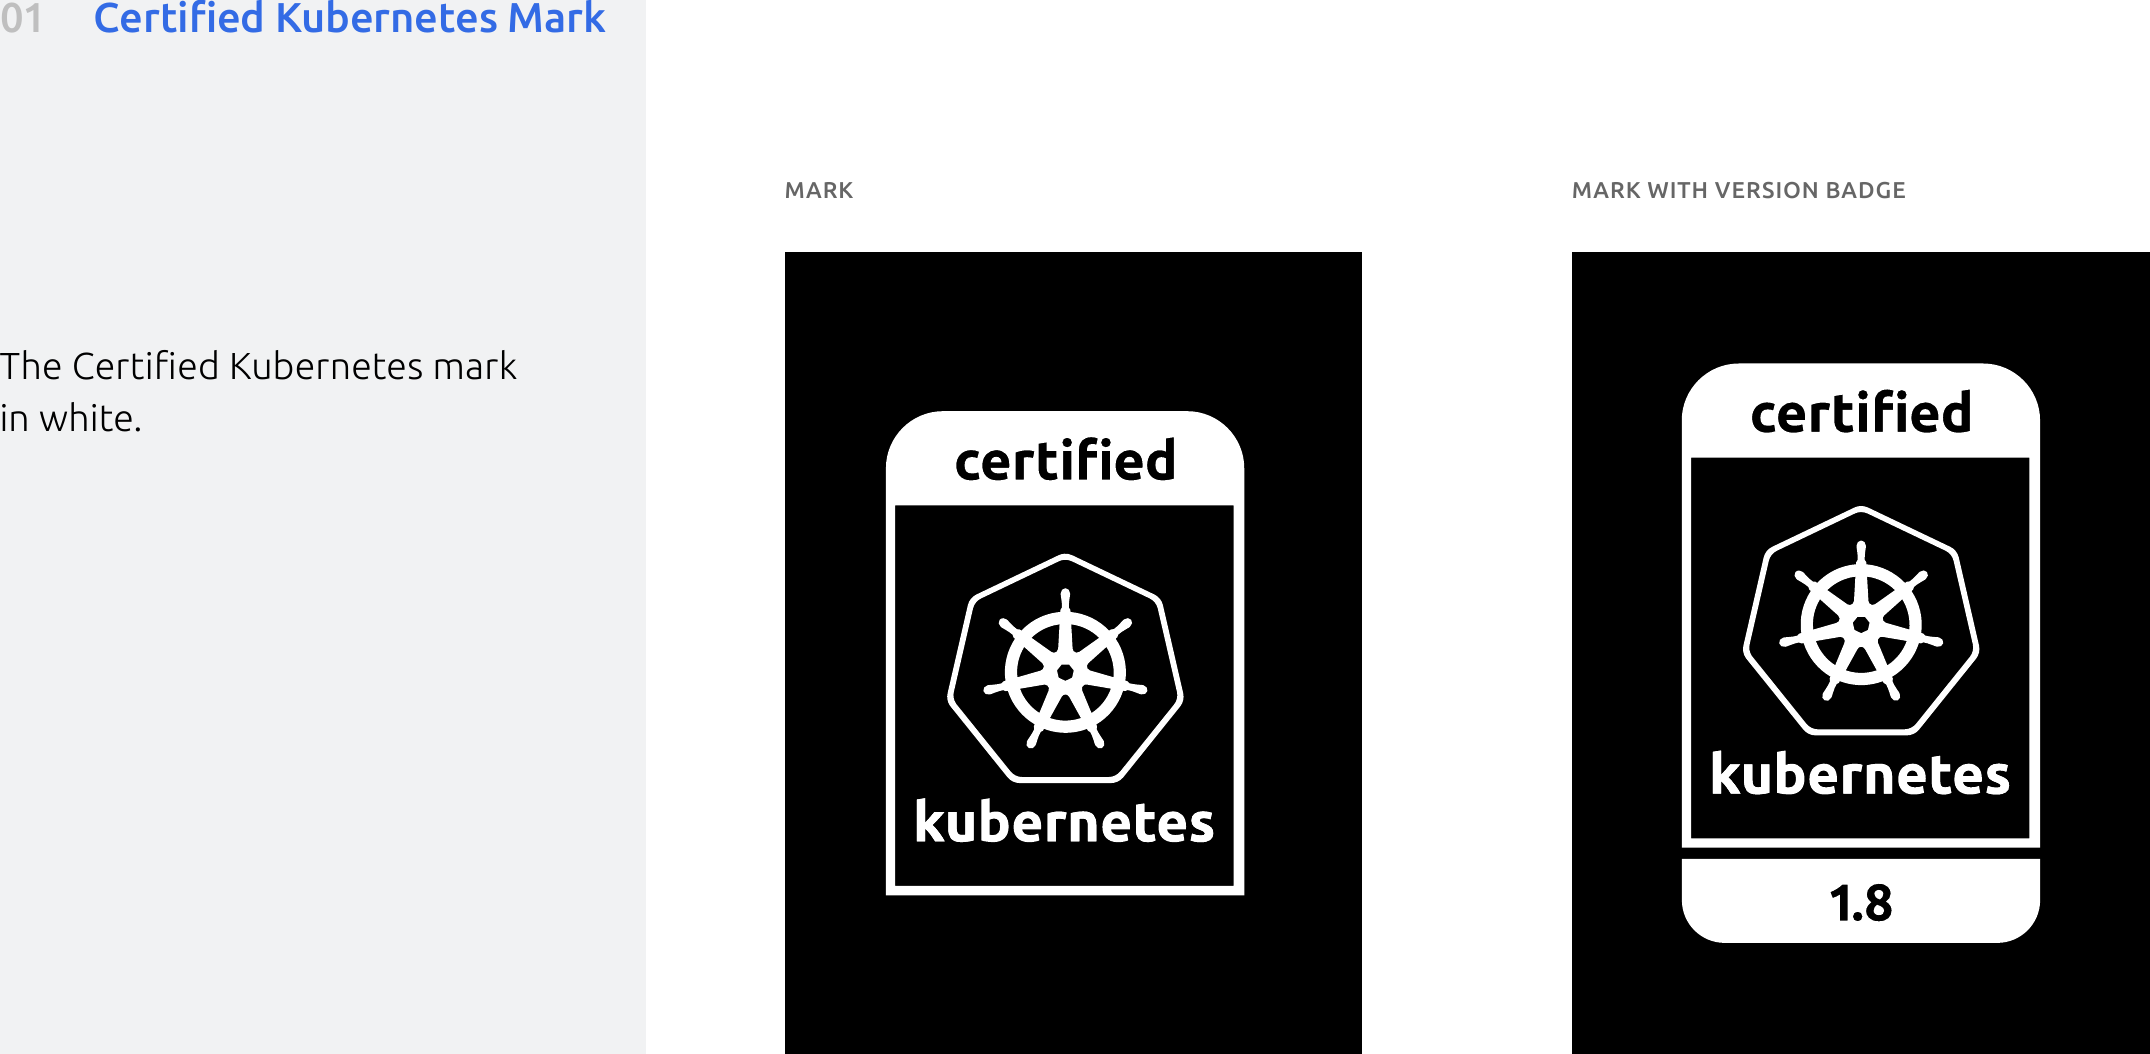 Page 5 of 9 - Certified-kubernetes-brand-guide